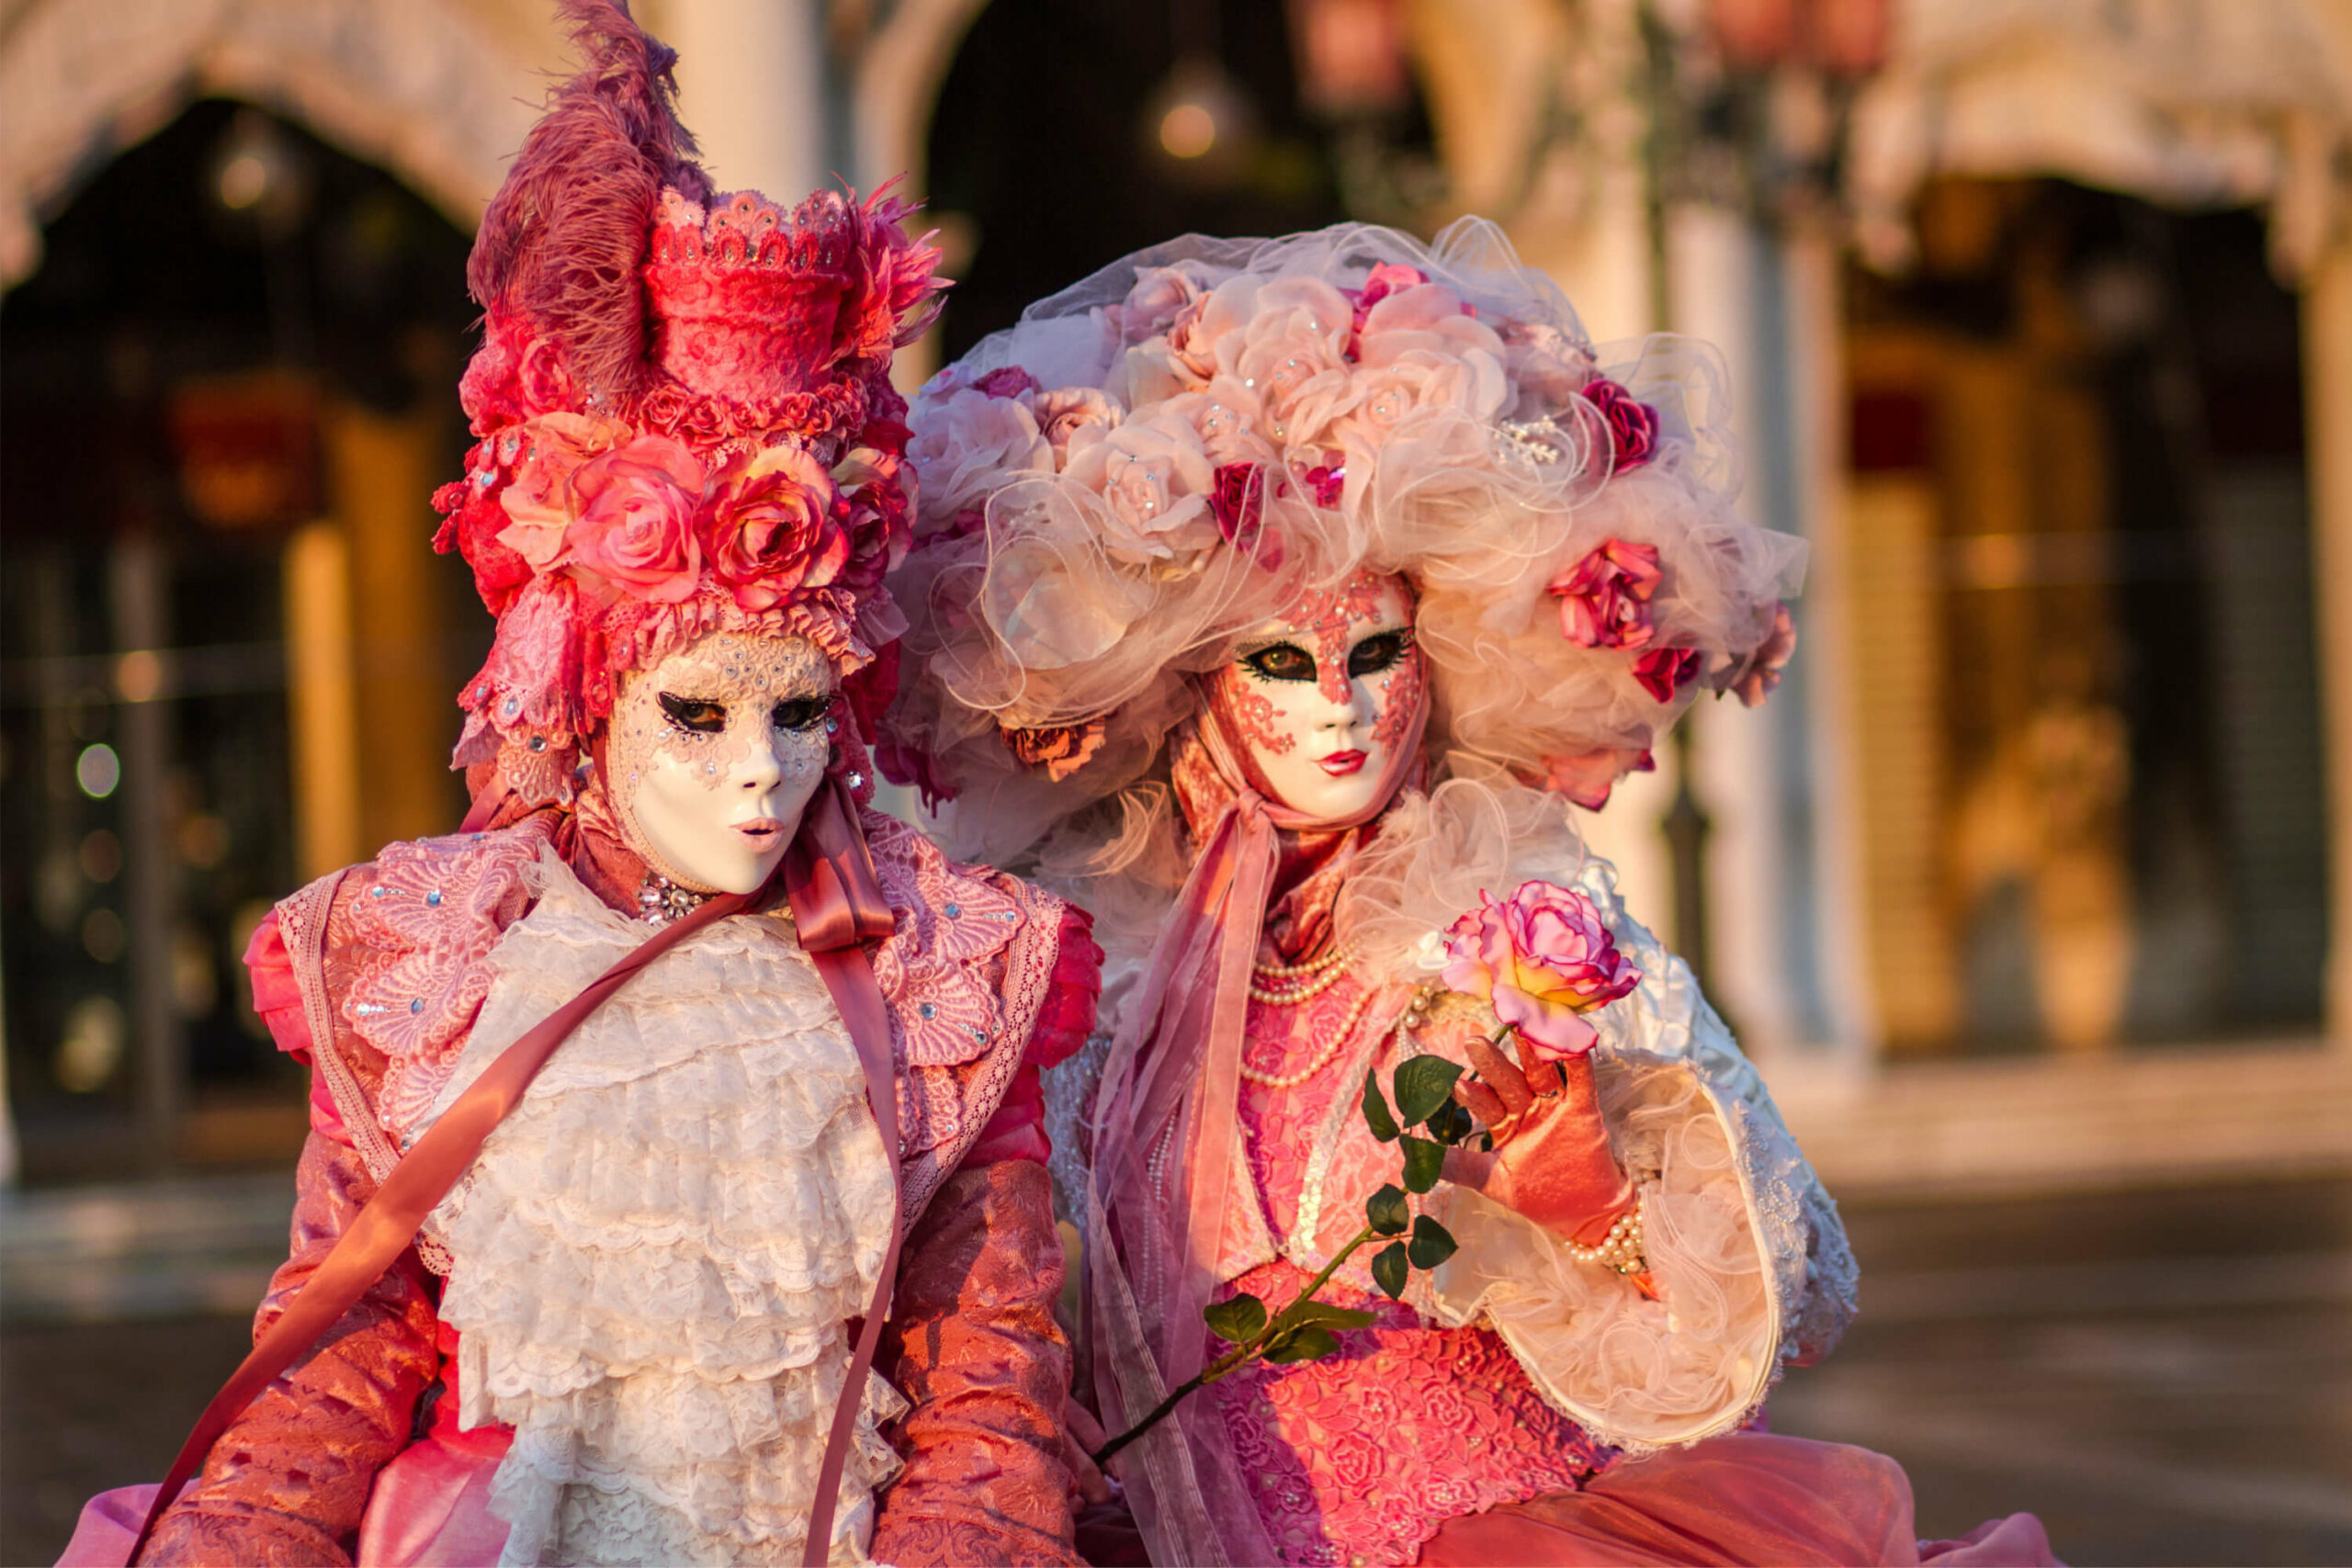 Two people dressed in pink costumes and wearing masks are wandering down a street in Venice, Italy during the Carnival.